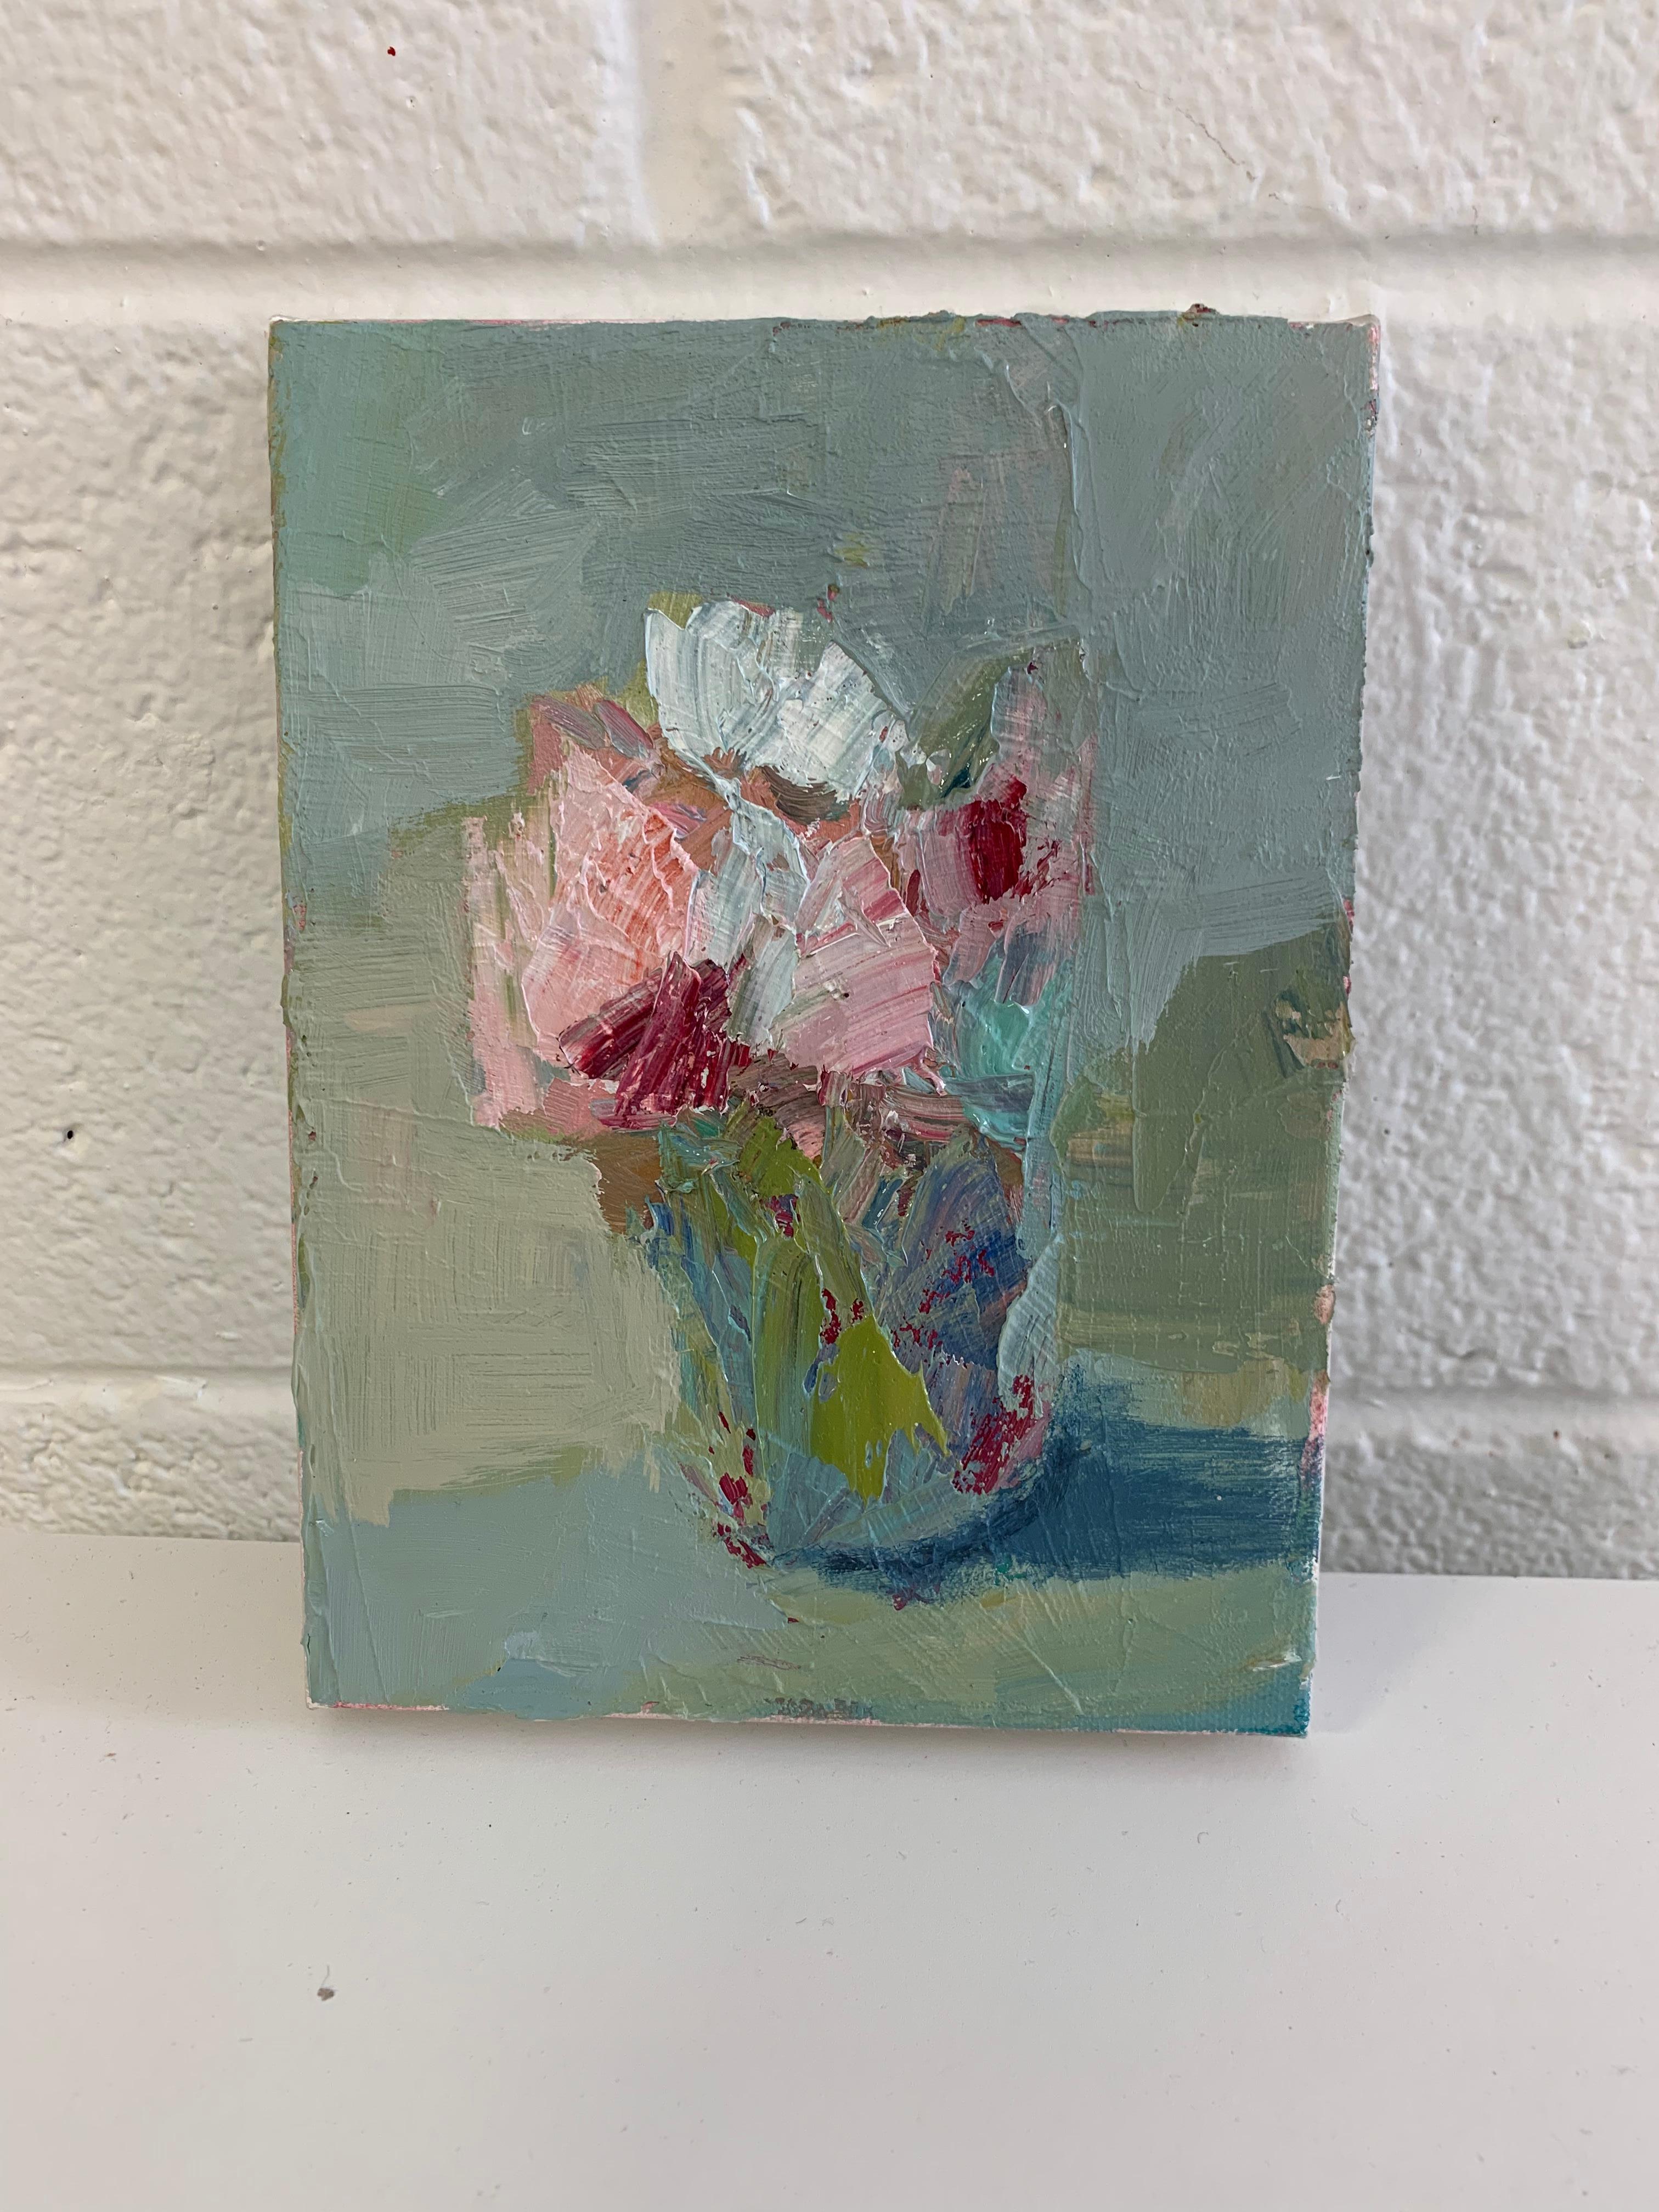 Lovely small oil floral painting by Stephanie Wheeler
Palette knife and brushwork 
Unframed canvas 
Great on a book shelf or an easel !